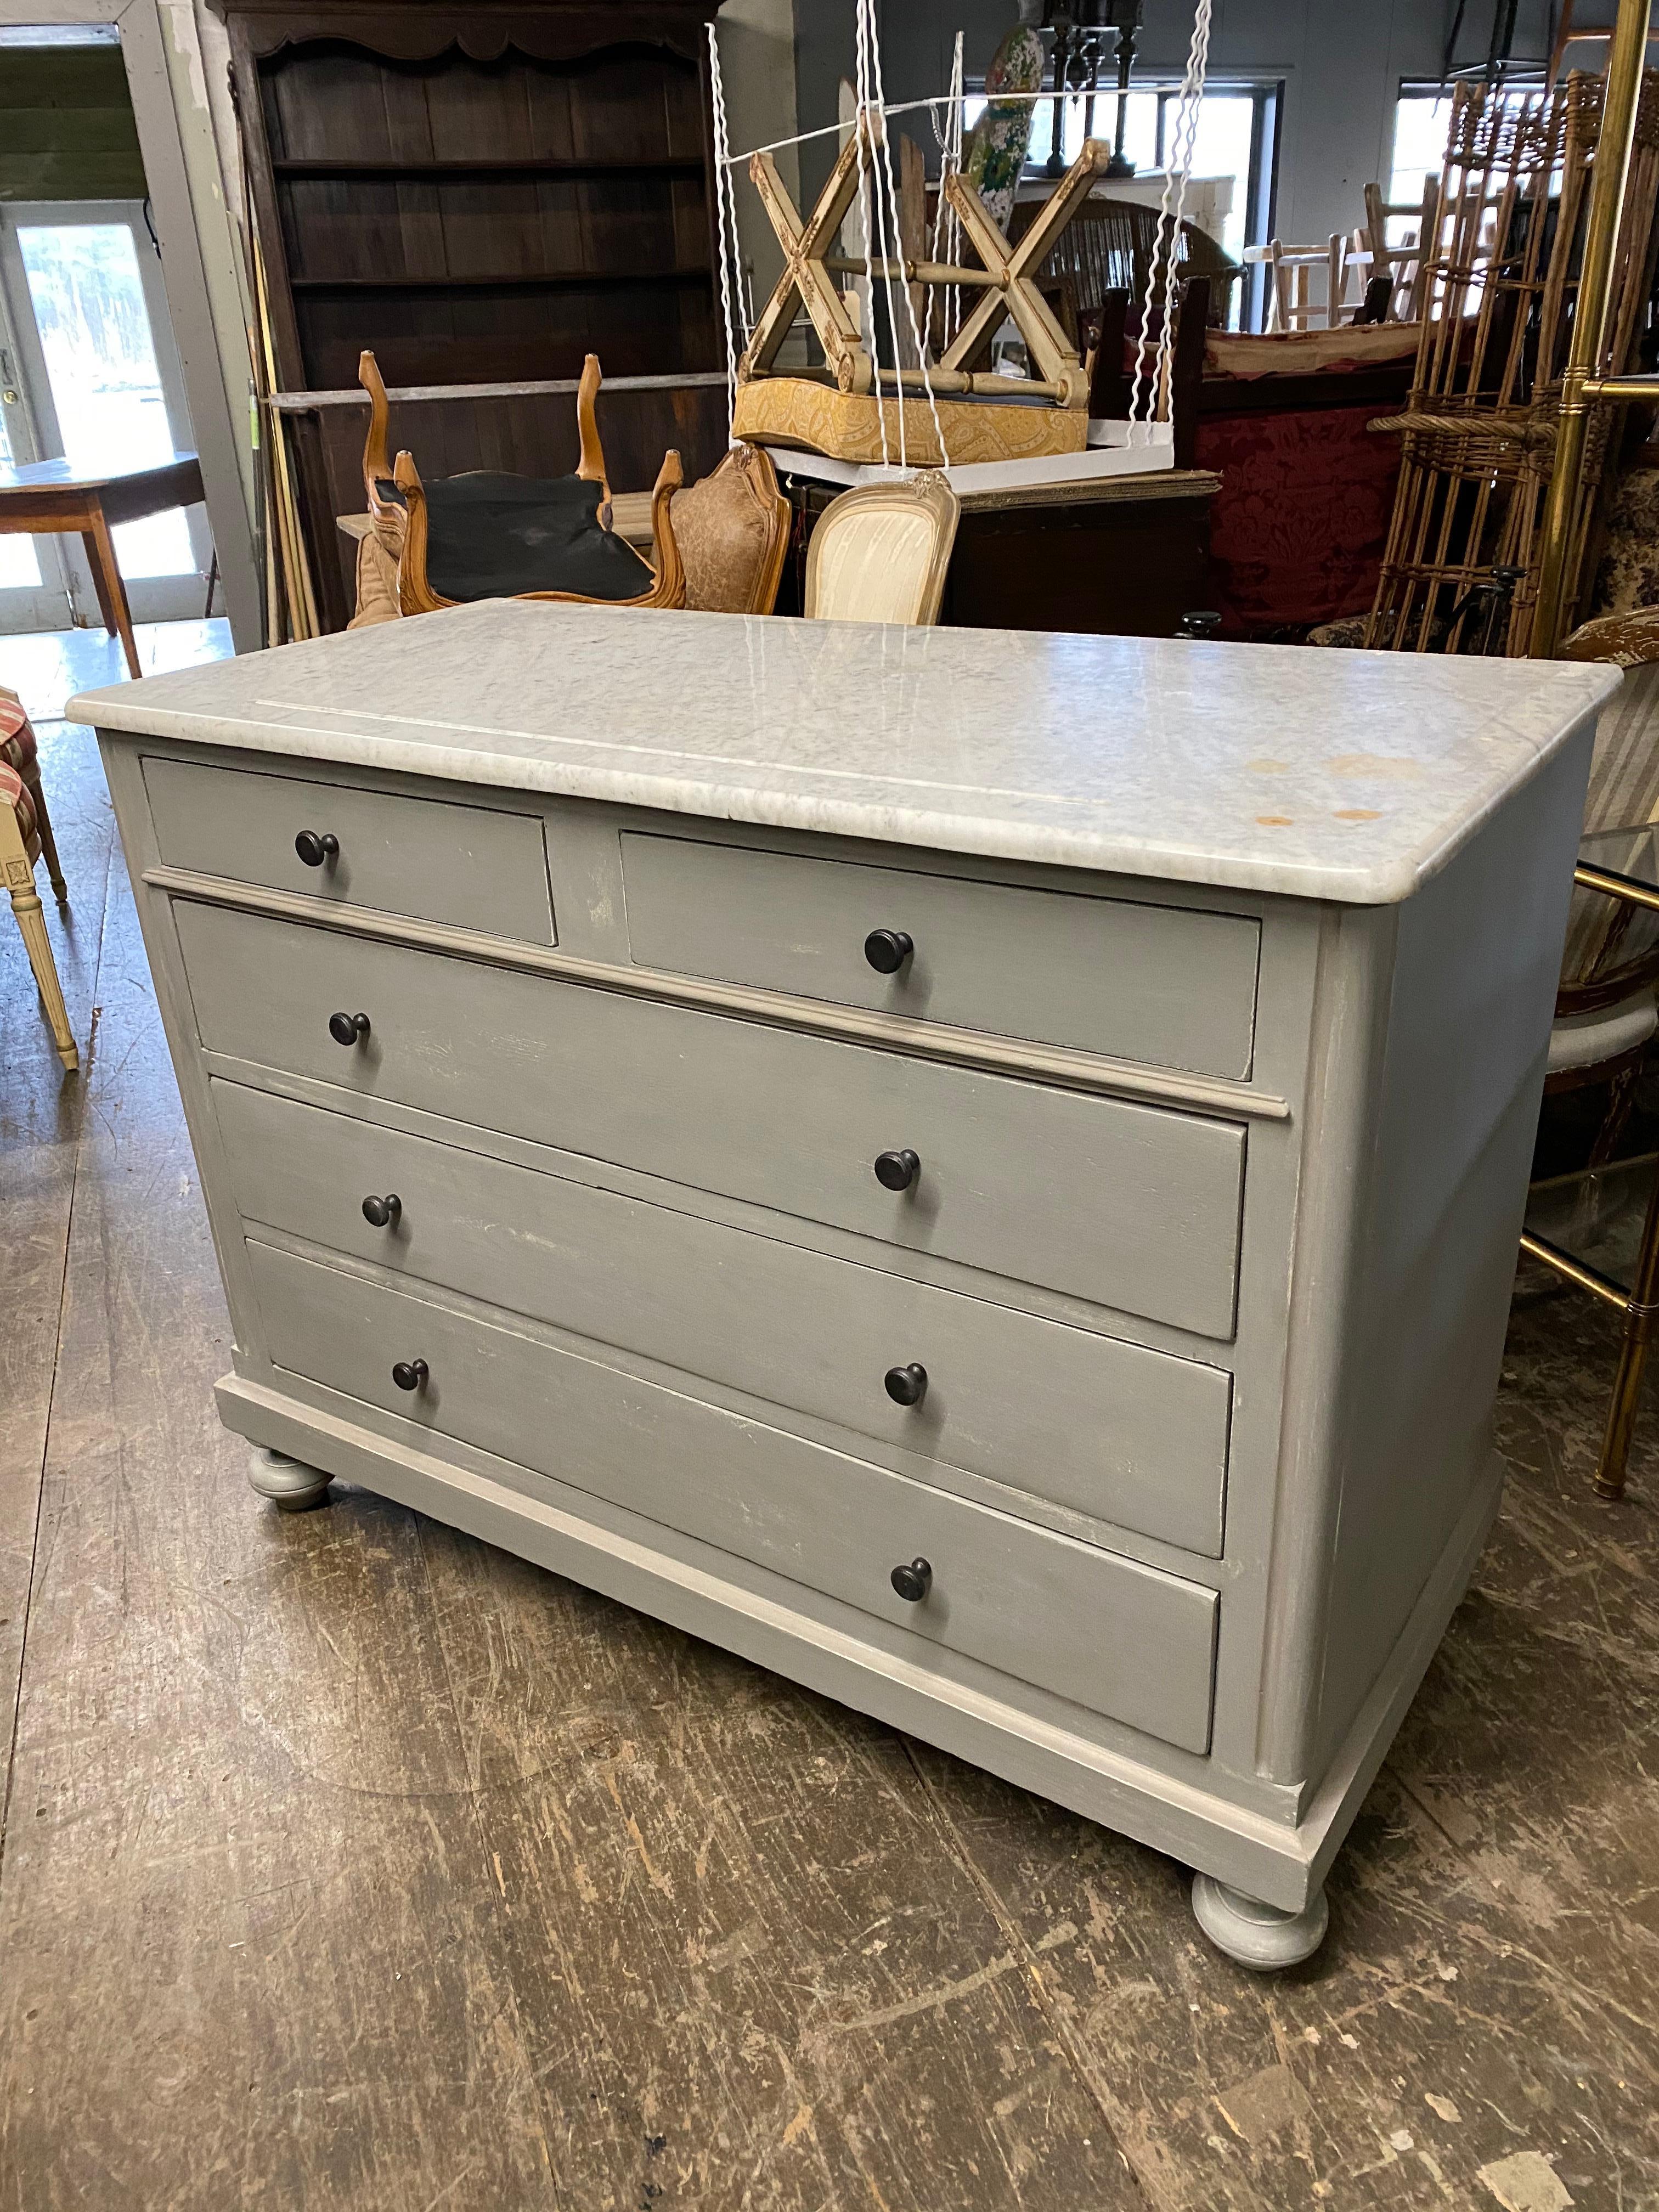 A classic American five-drawer custom painted chest with five drawers with marble top. The chest of drawers or dresser, painted in a Swedish Gustavian grey has two top drawers and 3 lower larger drawers. With iron pulls. The marble top shows aged